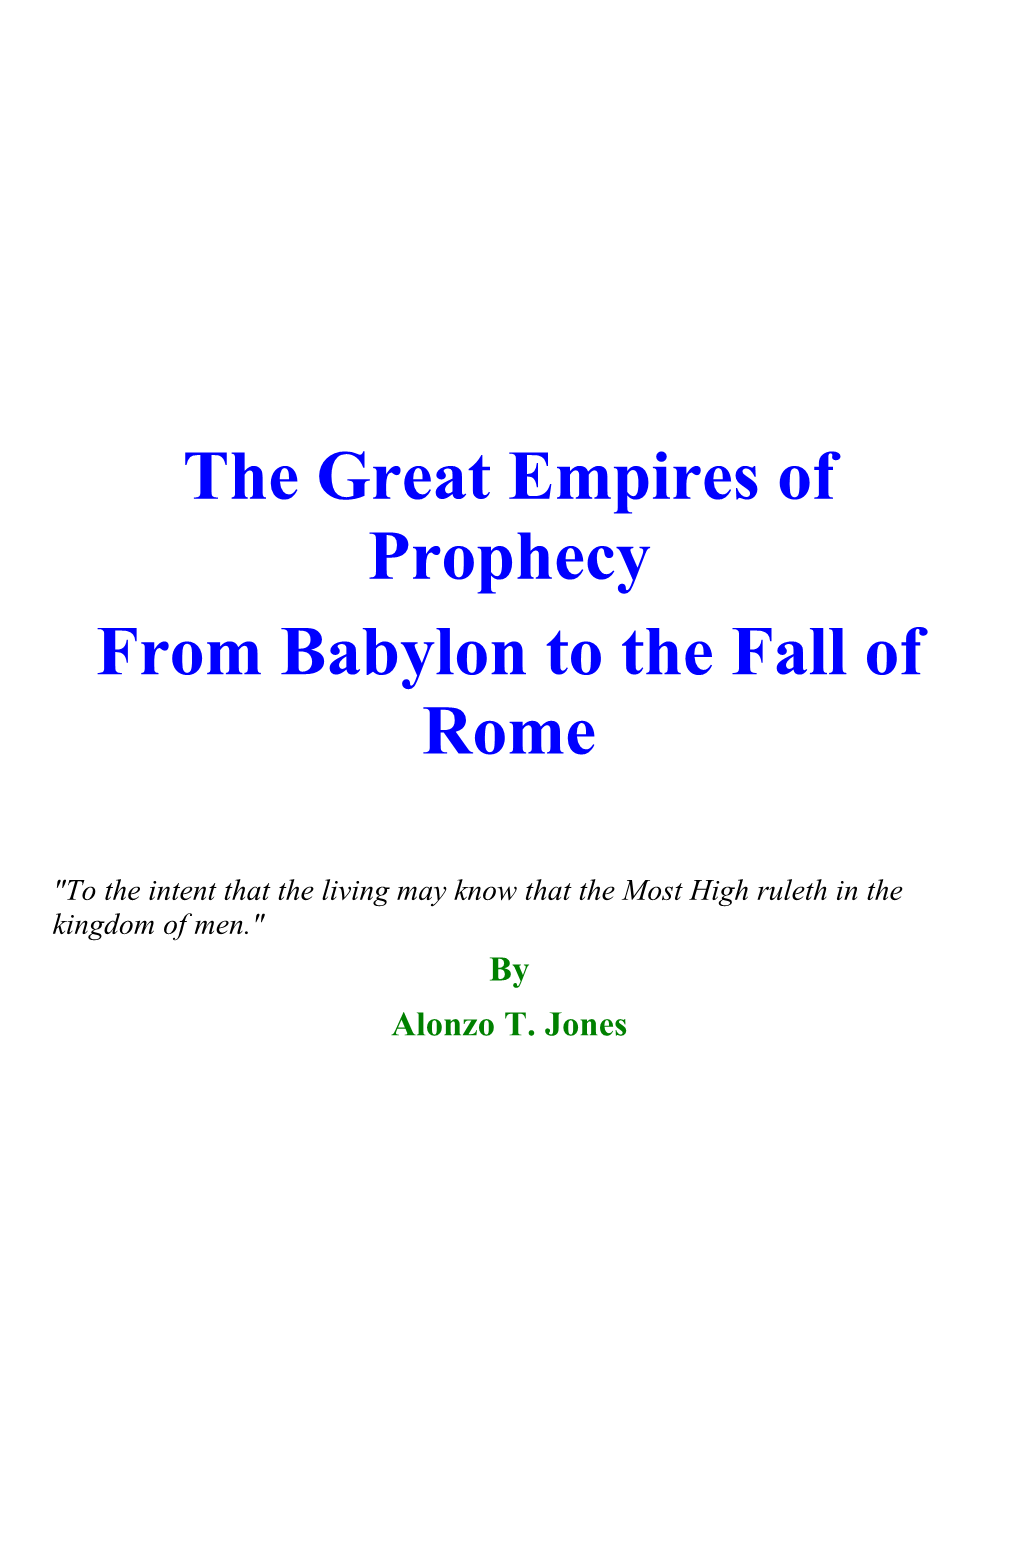 The Great Empires of Prophecy from Babylon to the Fall of Rome